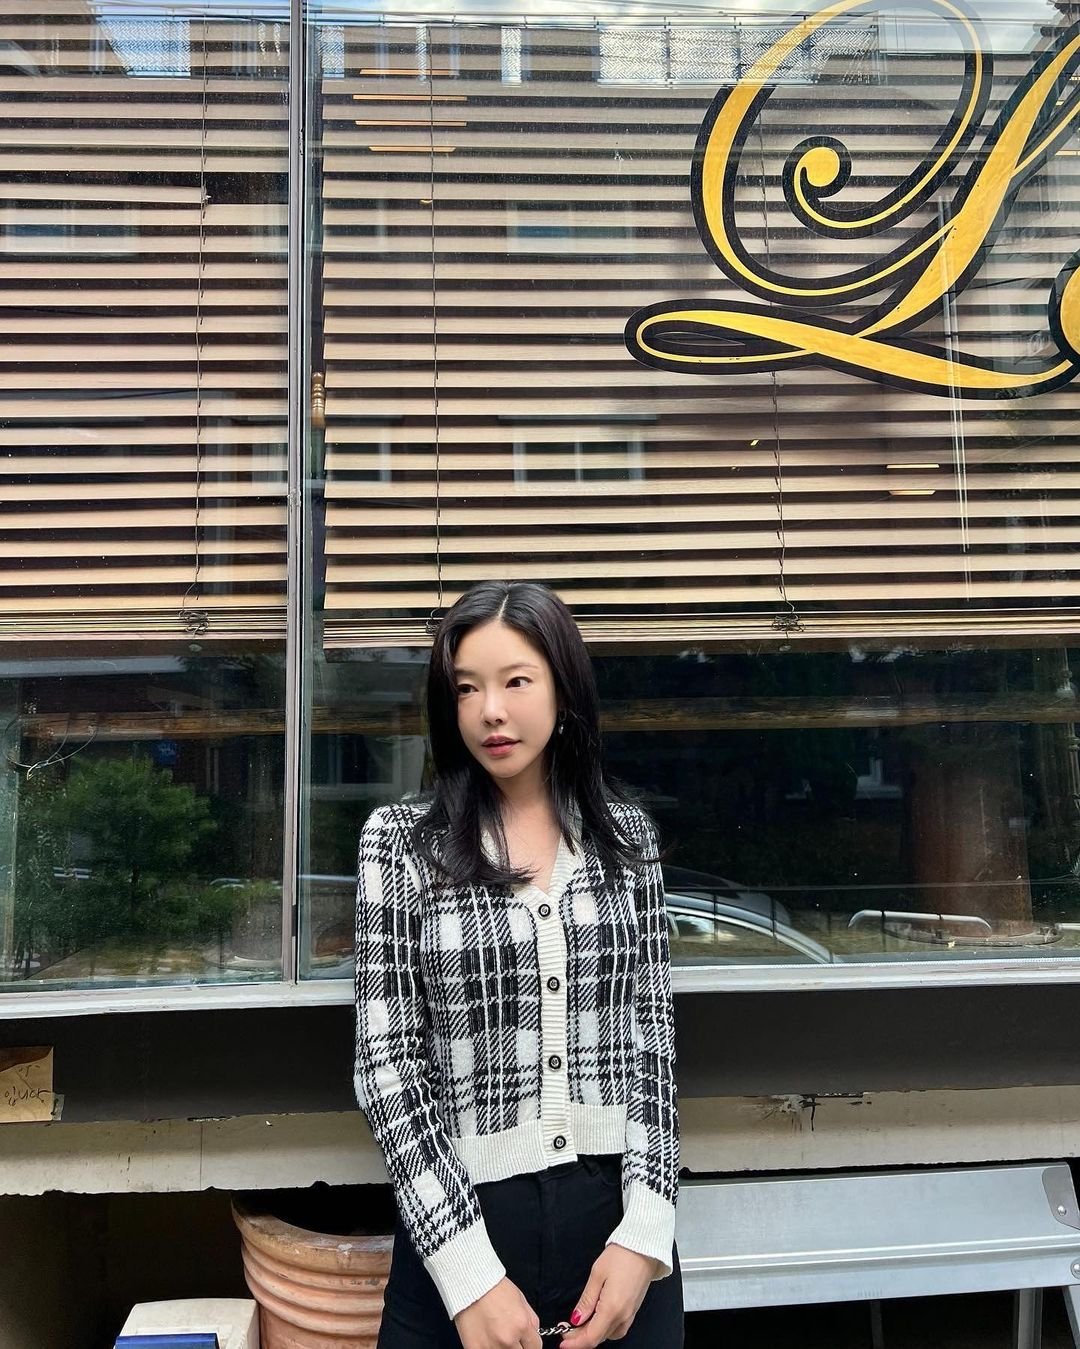 My name is Belle. I am 32 years old. Nice to meet you. I am from Taiwan and now I am in Seoul.    https://t.co/oQU3ZnF9ce